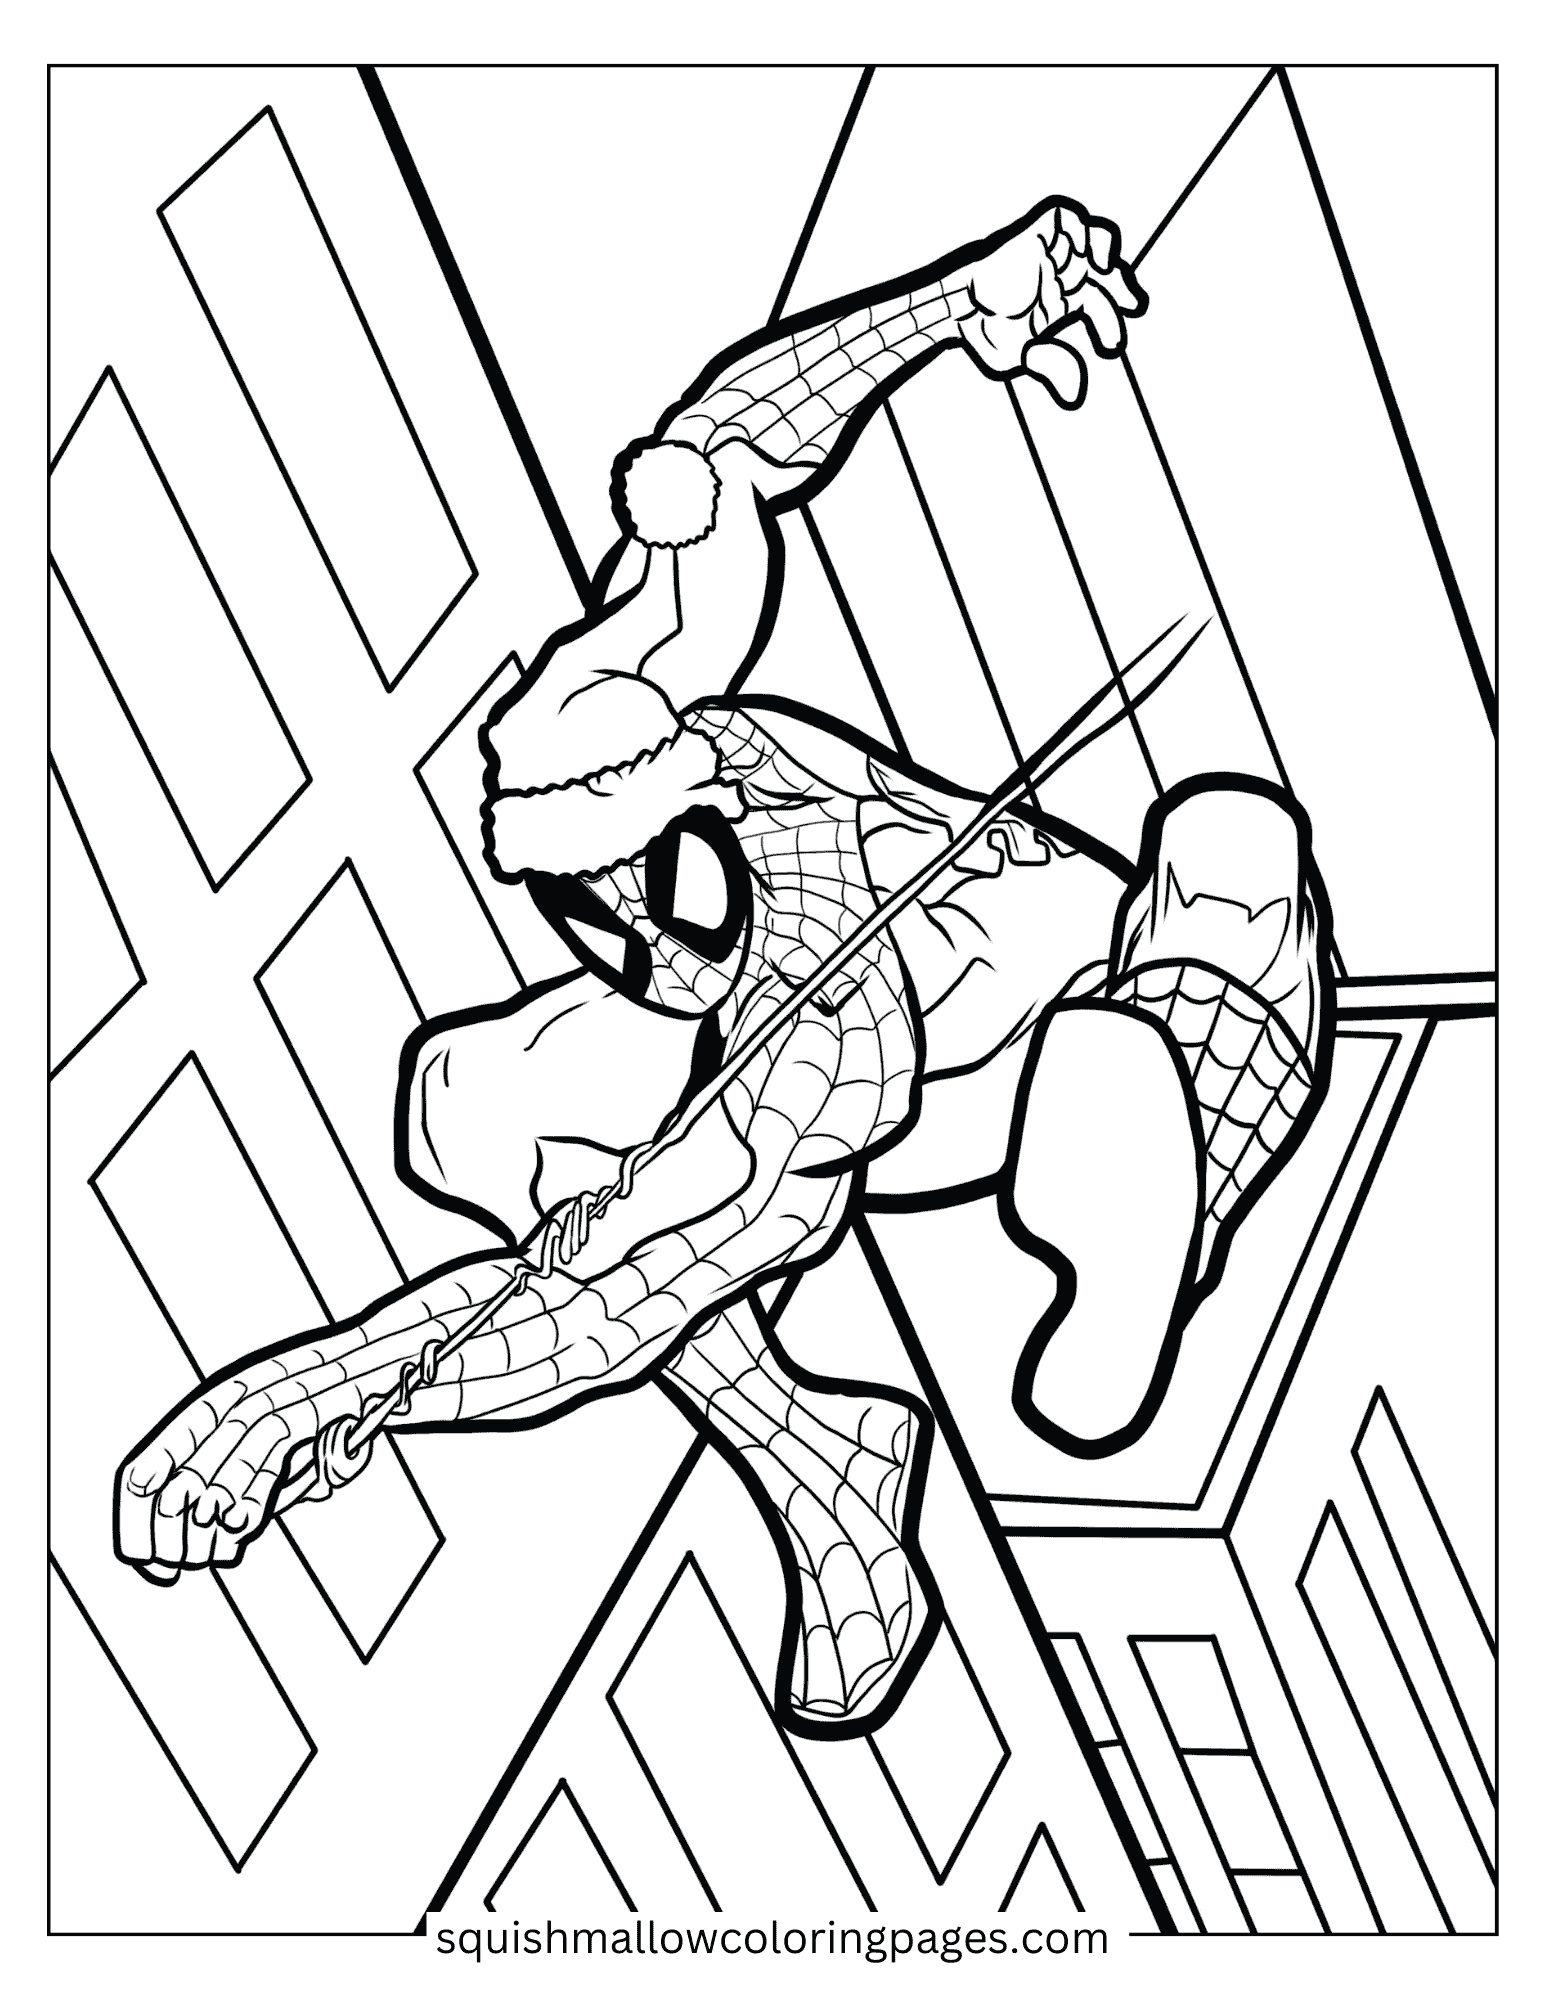 Flying Spiderman coloring pages